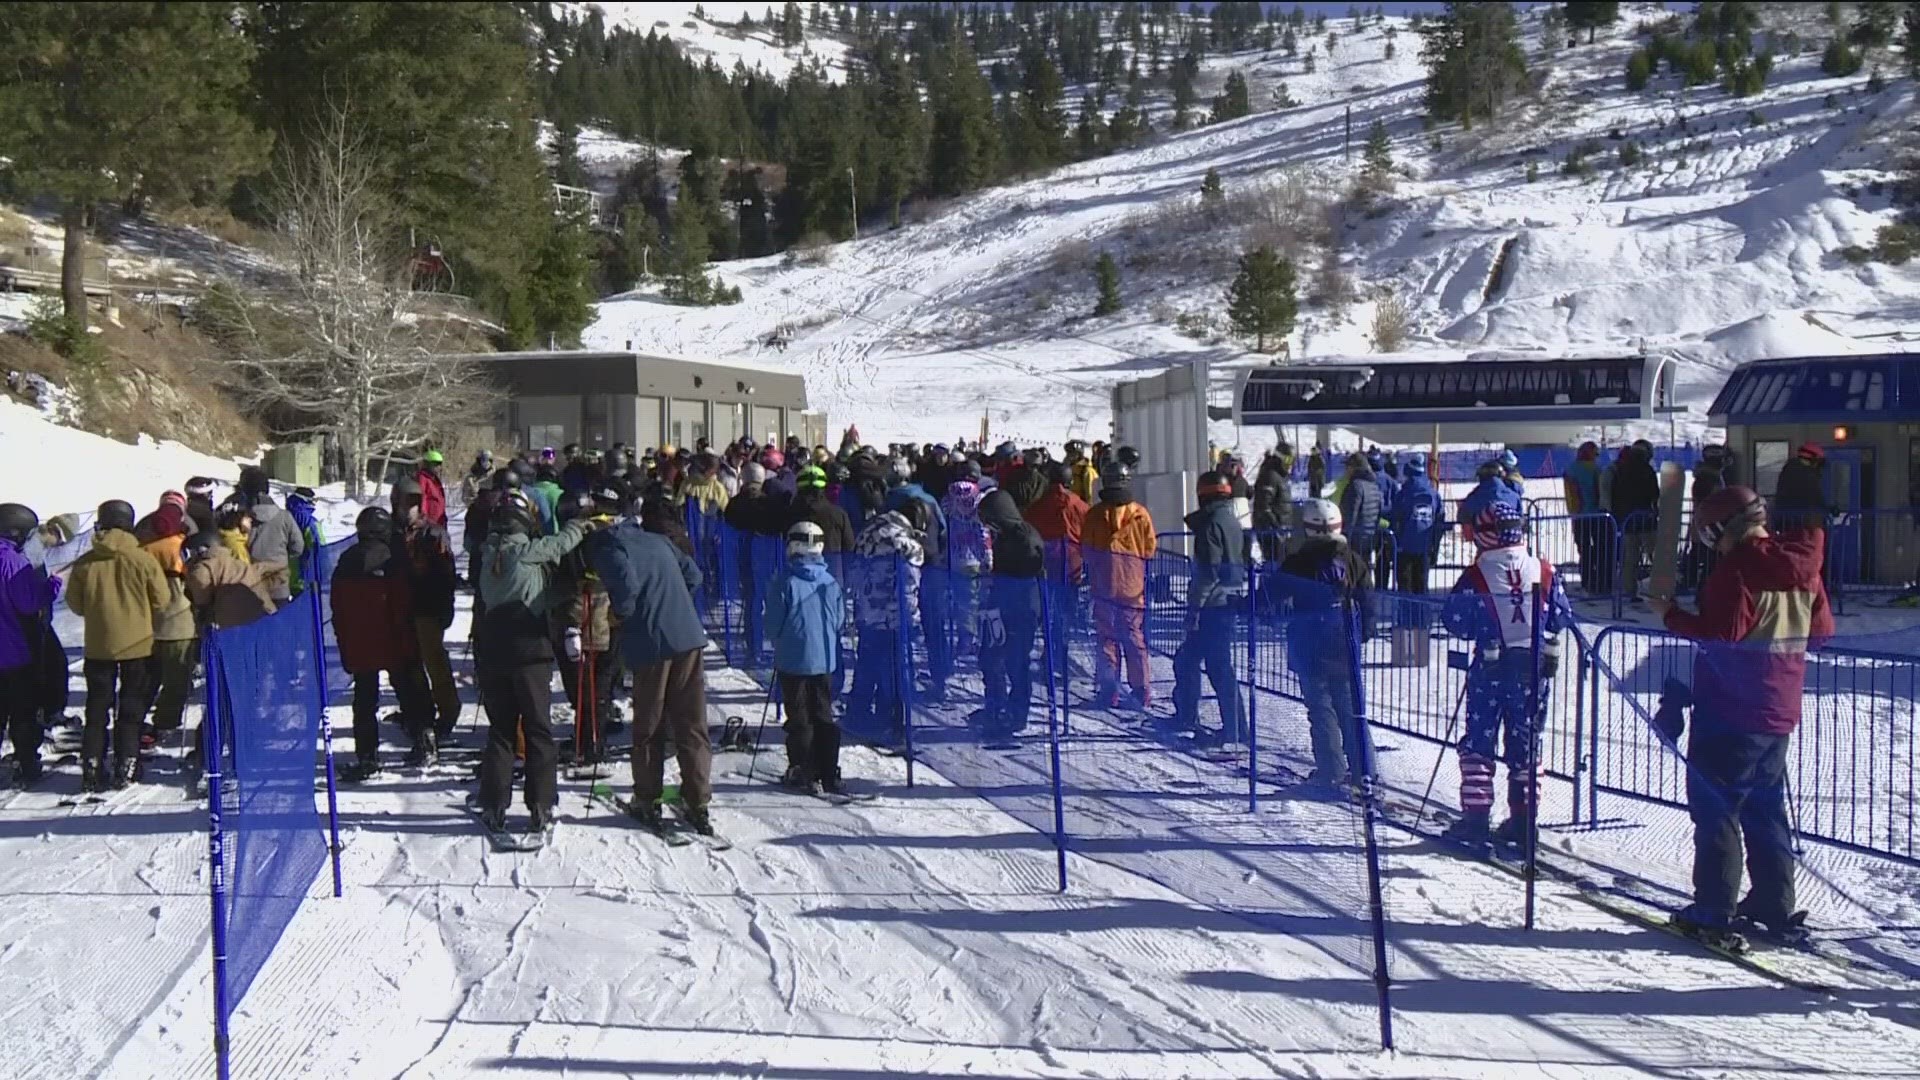 Due to late season snowfall upwards of 12 inches, Bogus Basin will extend operations through April 14, followed by a final hoorah the weekend of April 20.